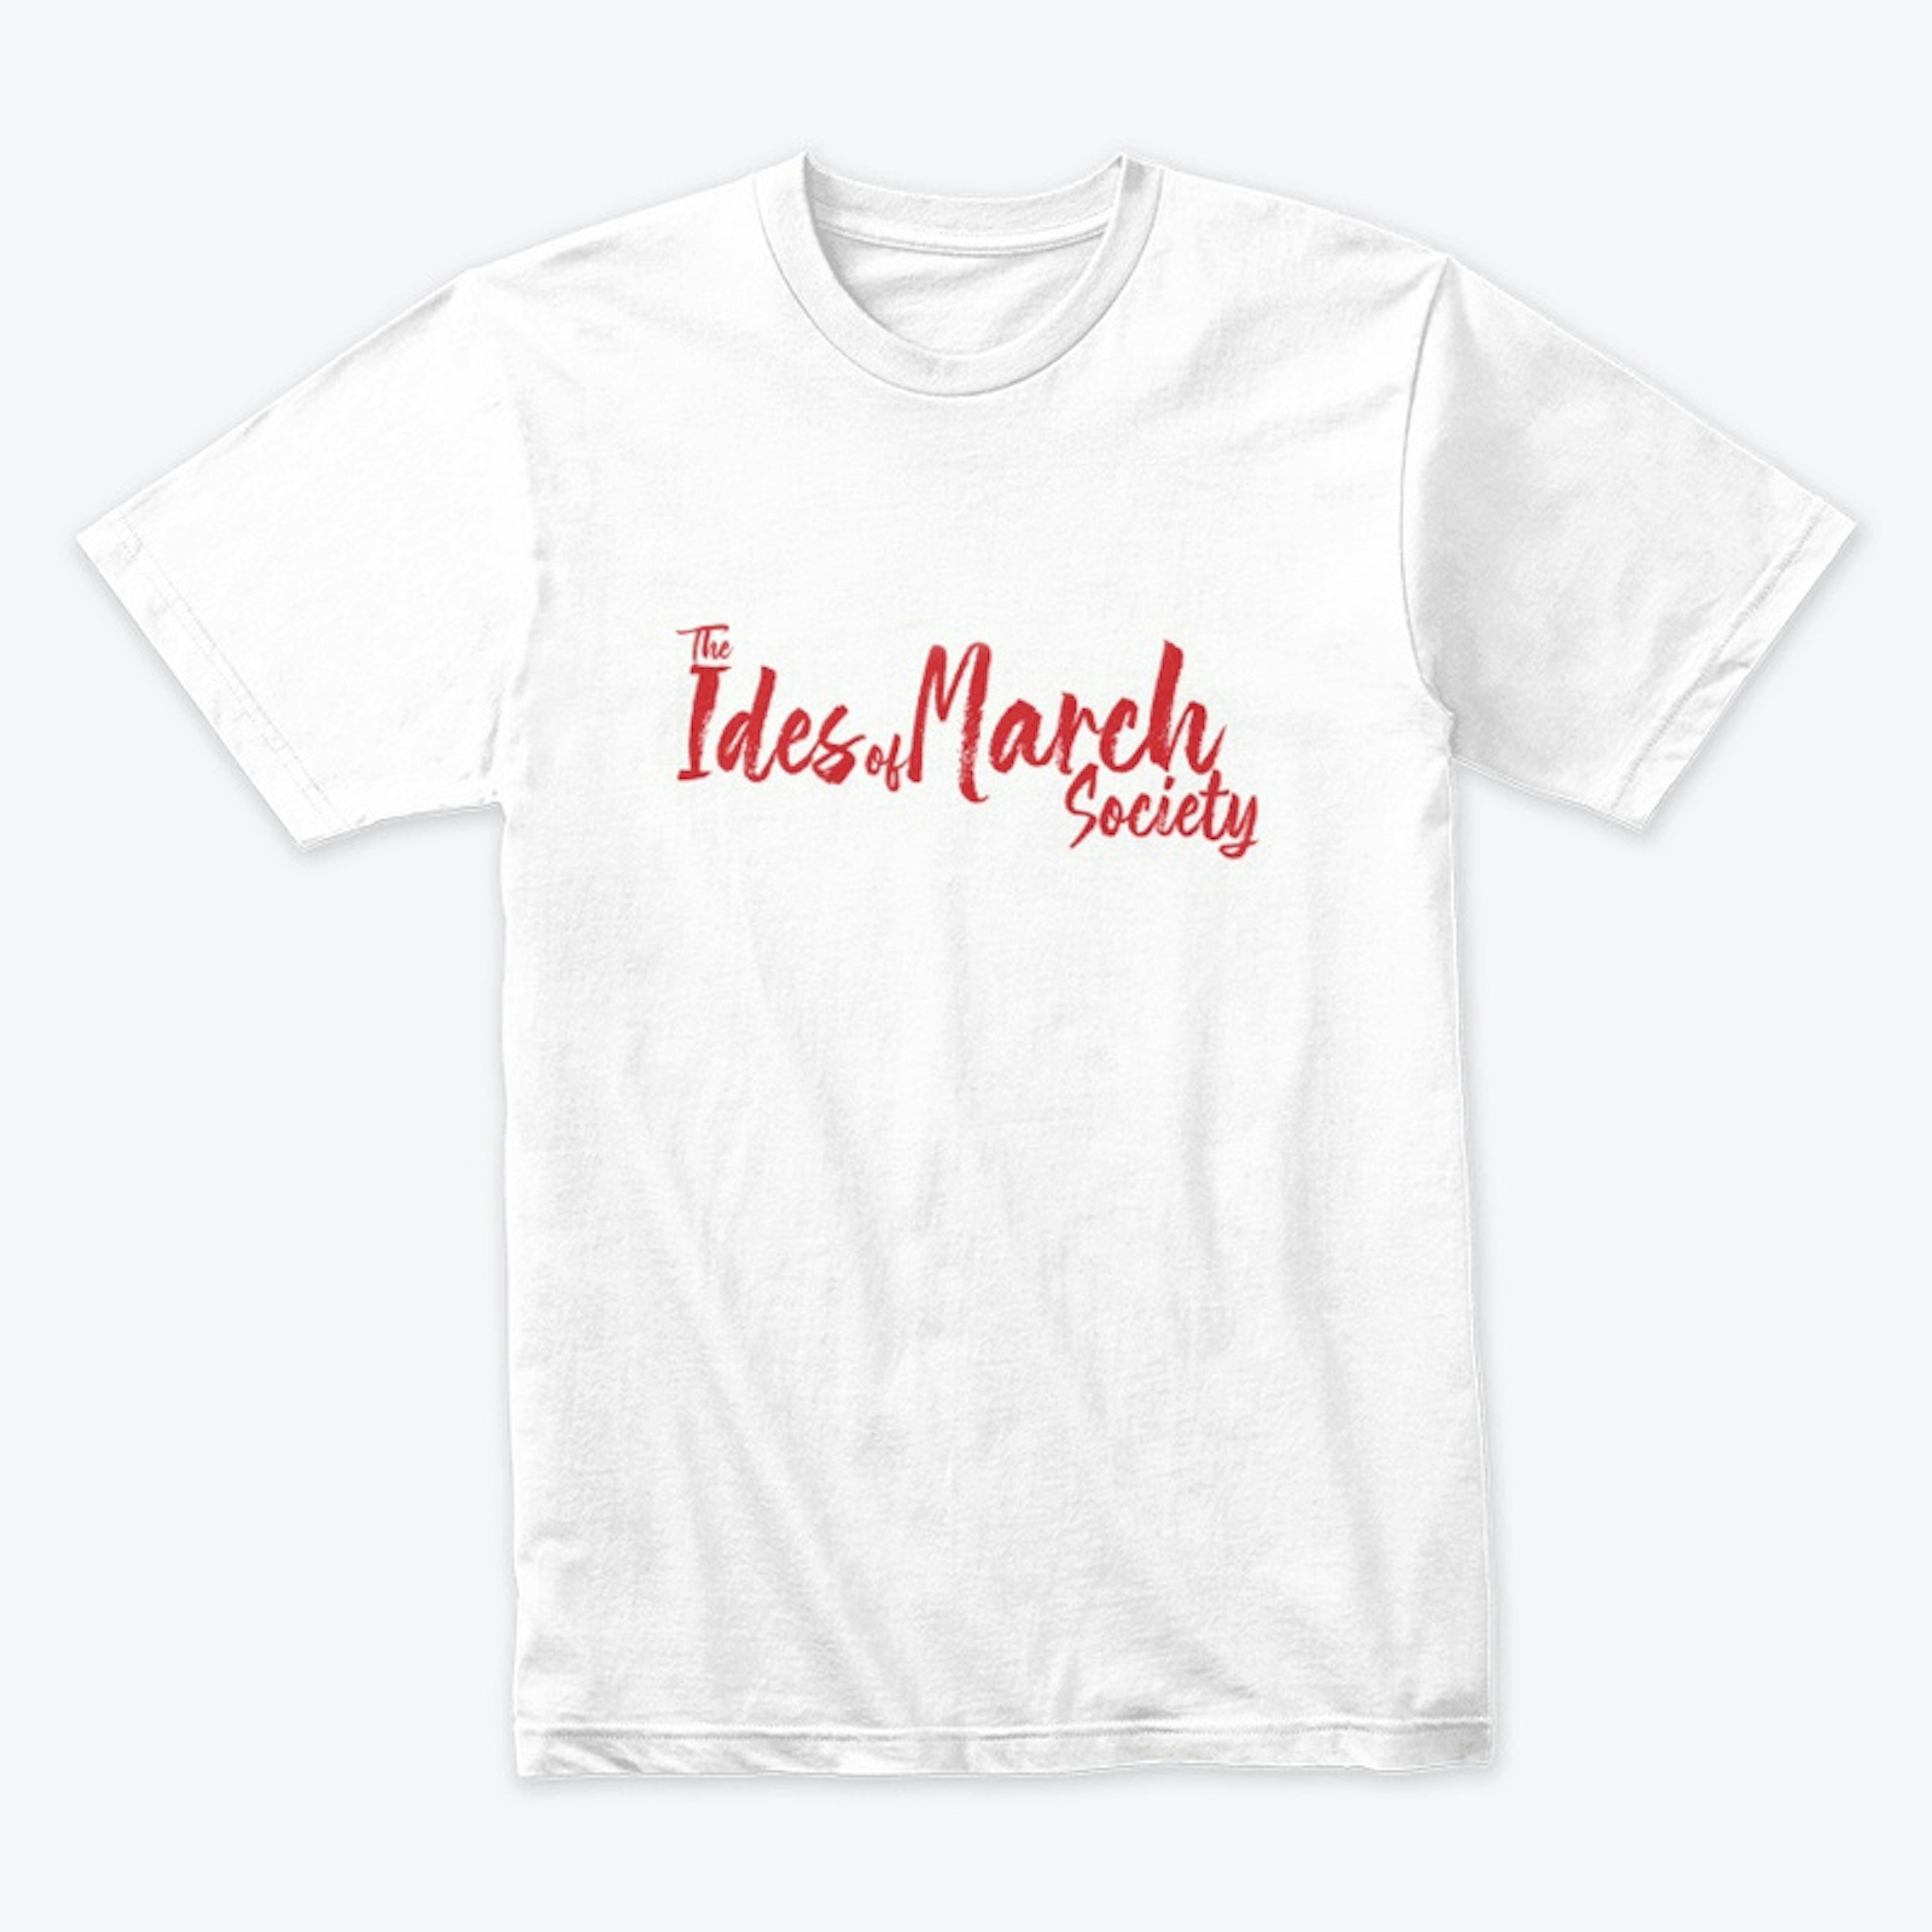 Ides of March Society Tee